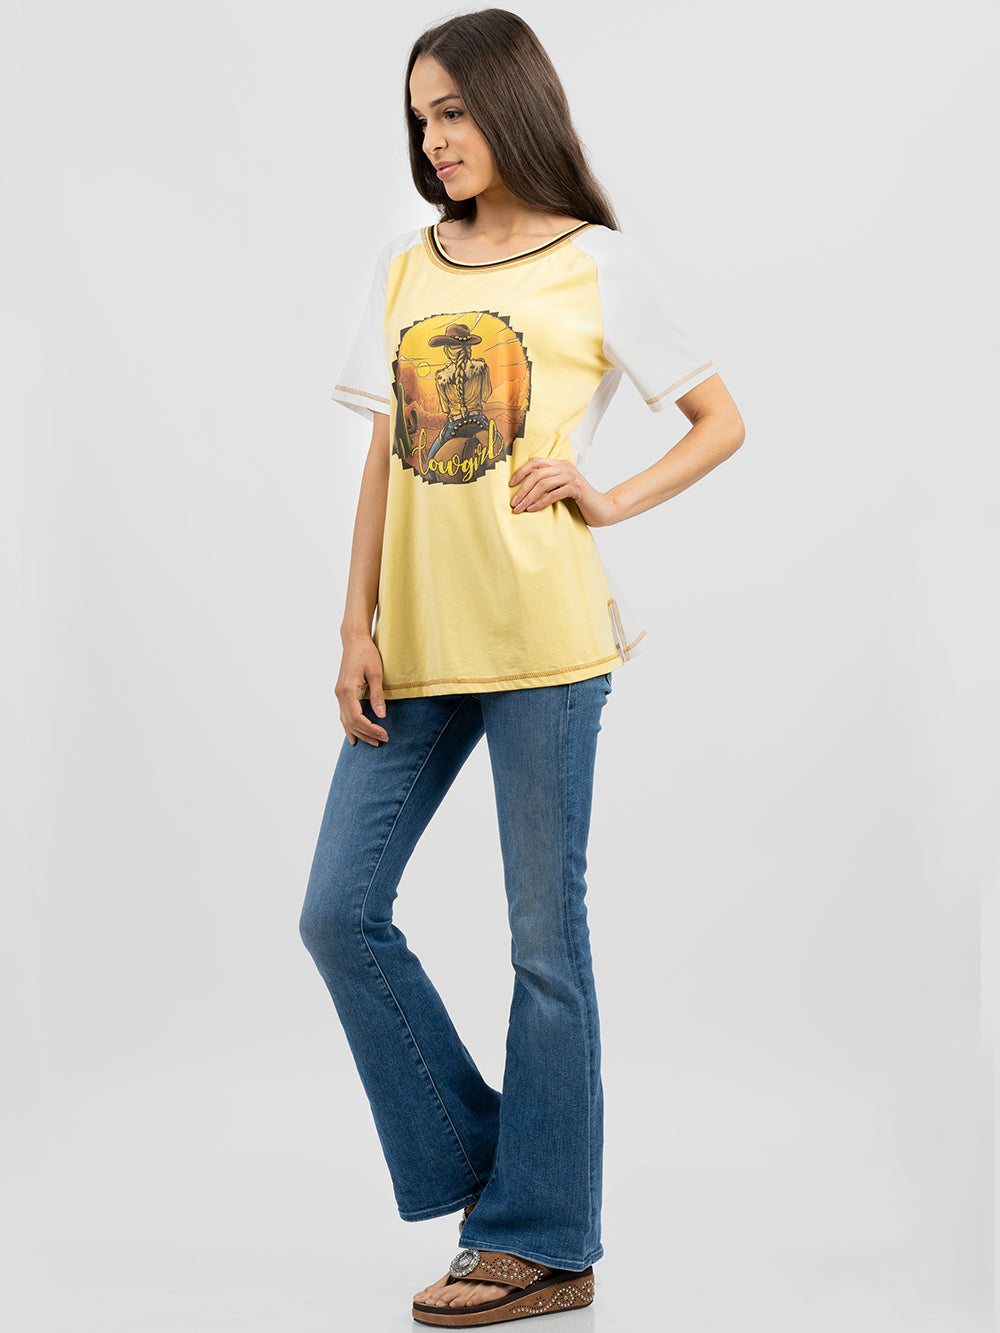 Women's Mineral Wash “Cowgirl” Graphic Short Sleeve Tee - Cowgirl Wear